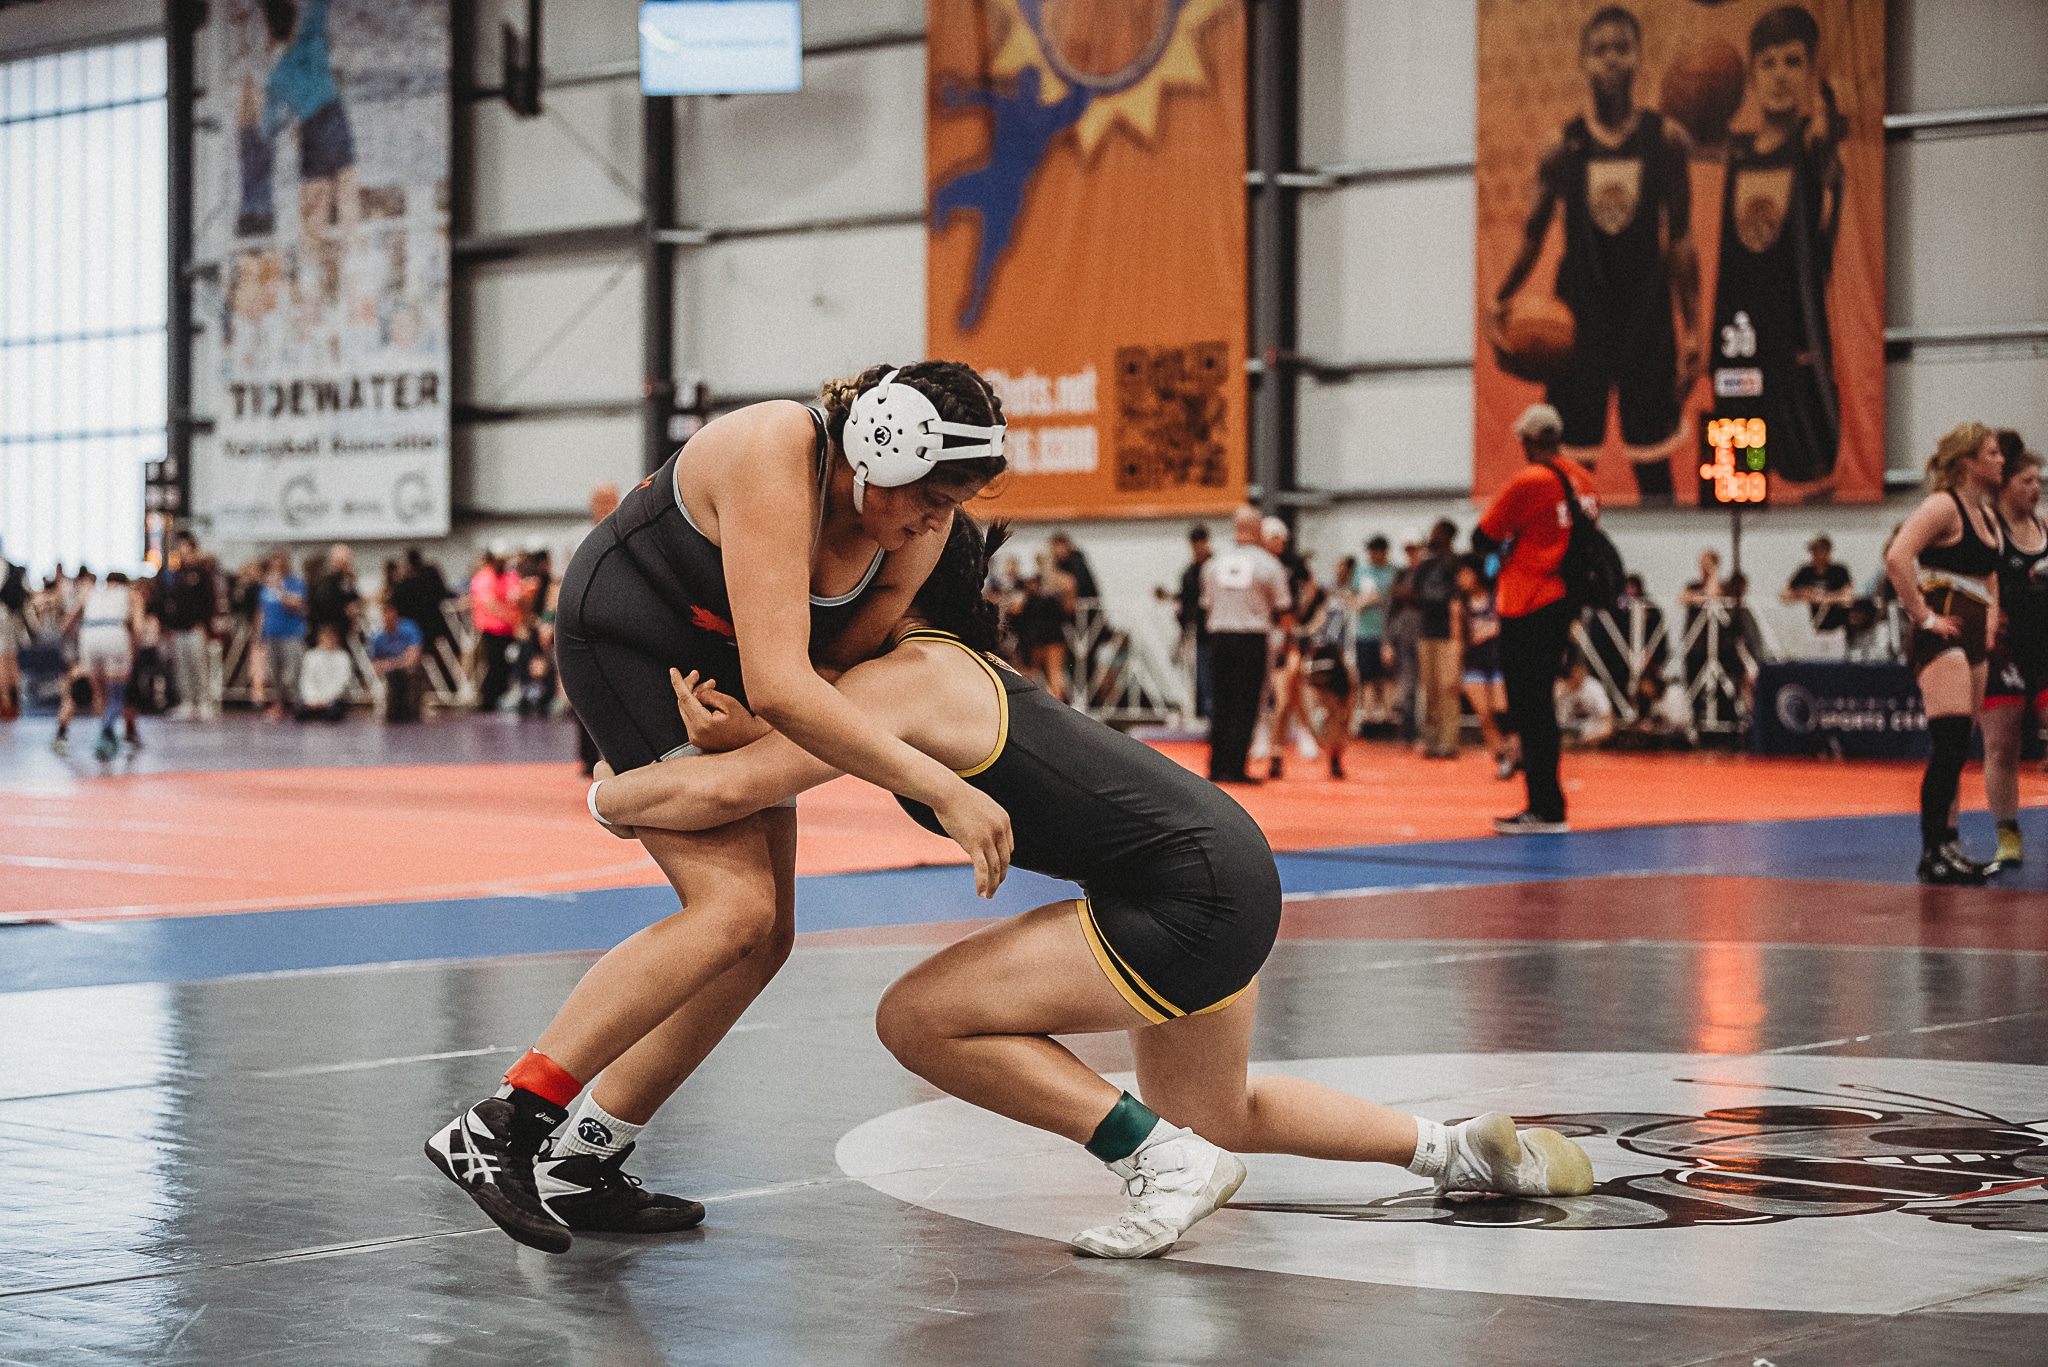 Grace Leota gets a double leg takedown against her opponent at the 2023 High School National Championship in Virginia Beach, VA.